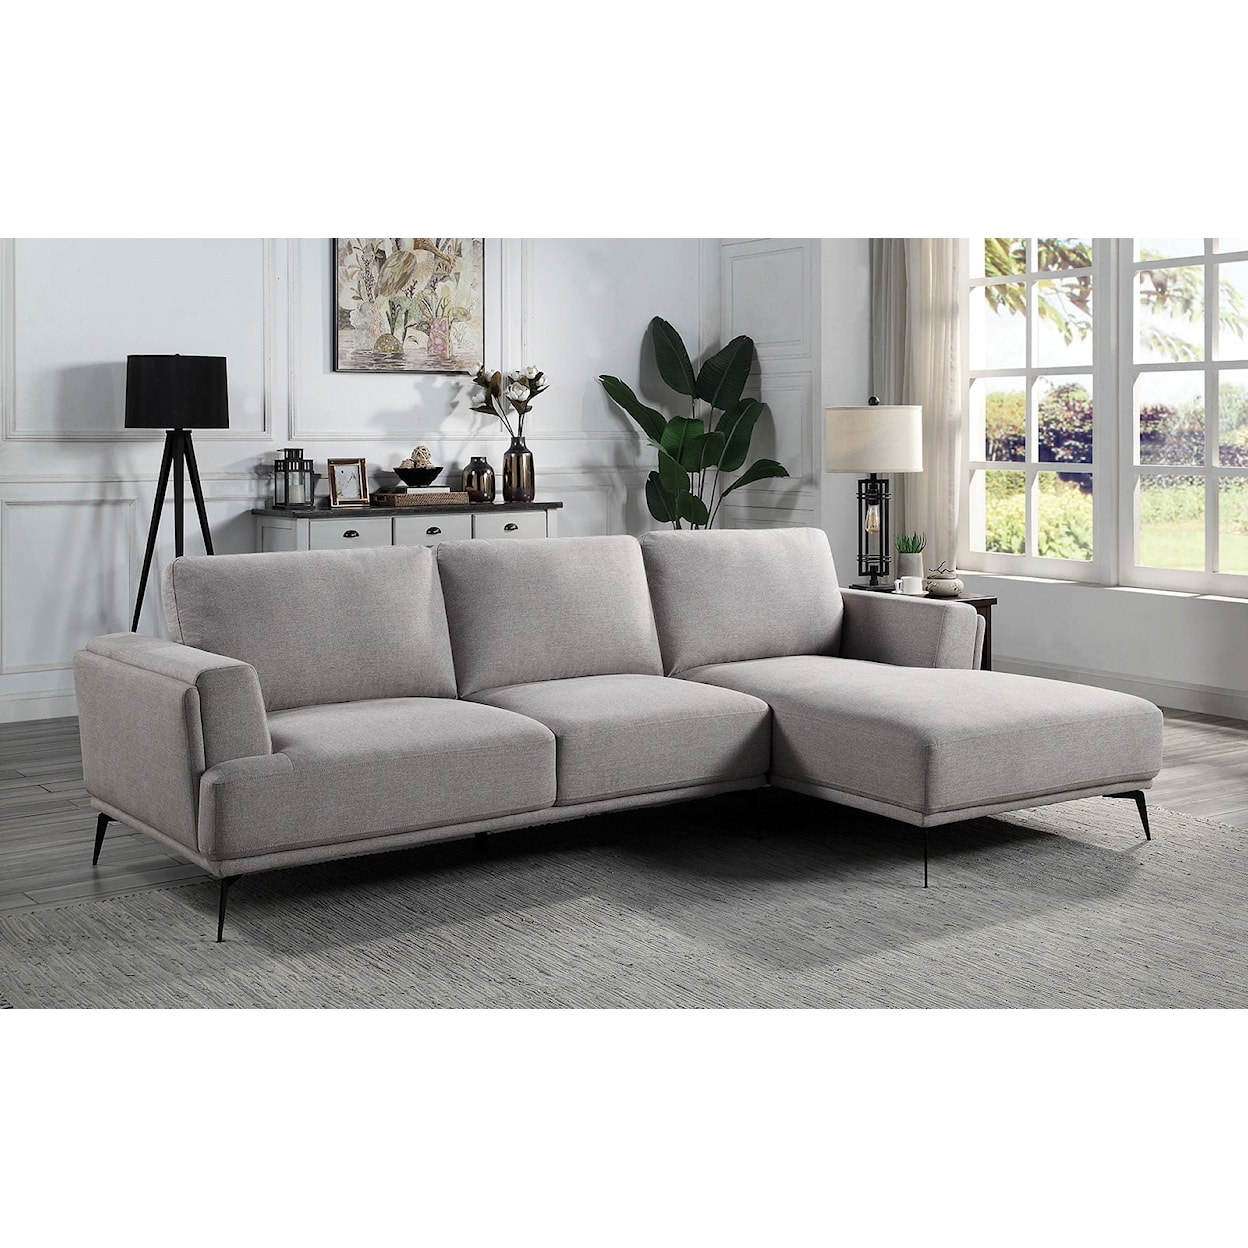 Furniture of America LAUFEN L-shaped Sectional, Gray